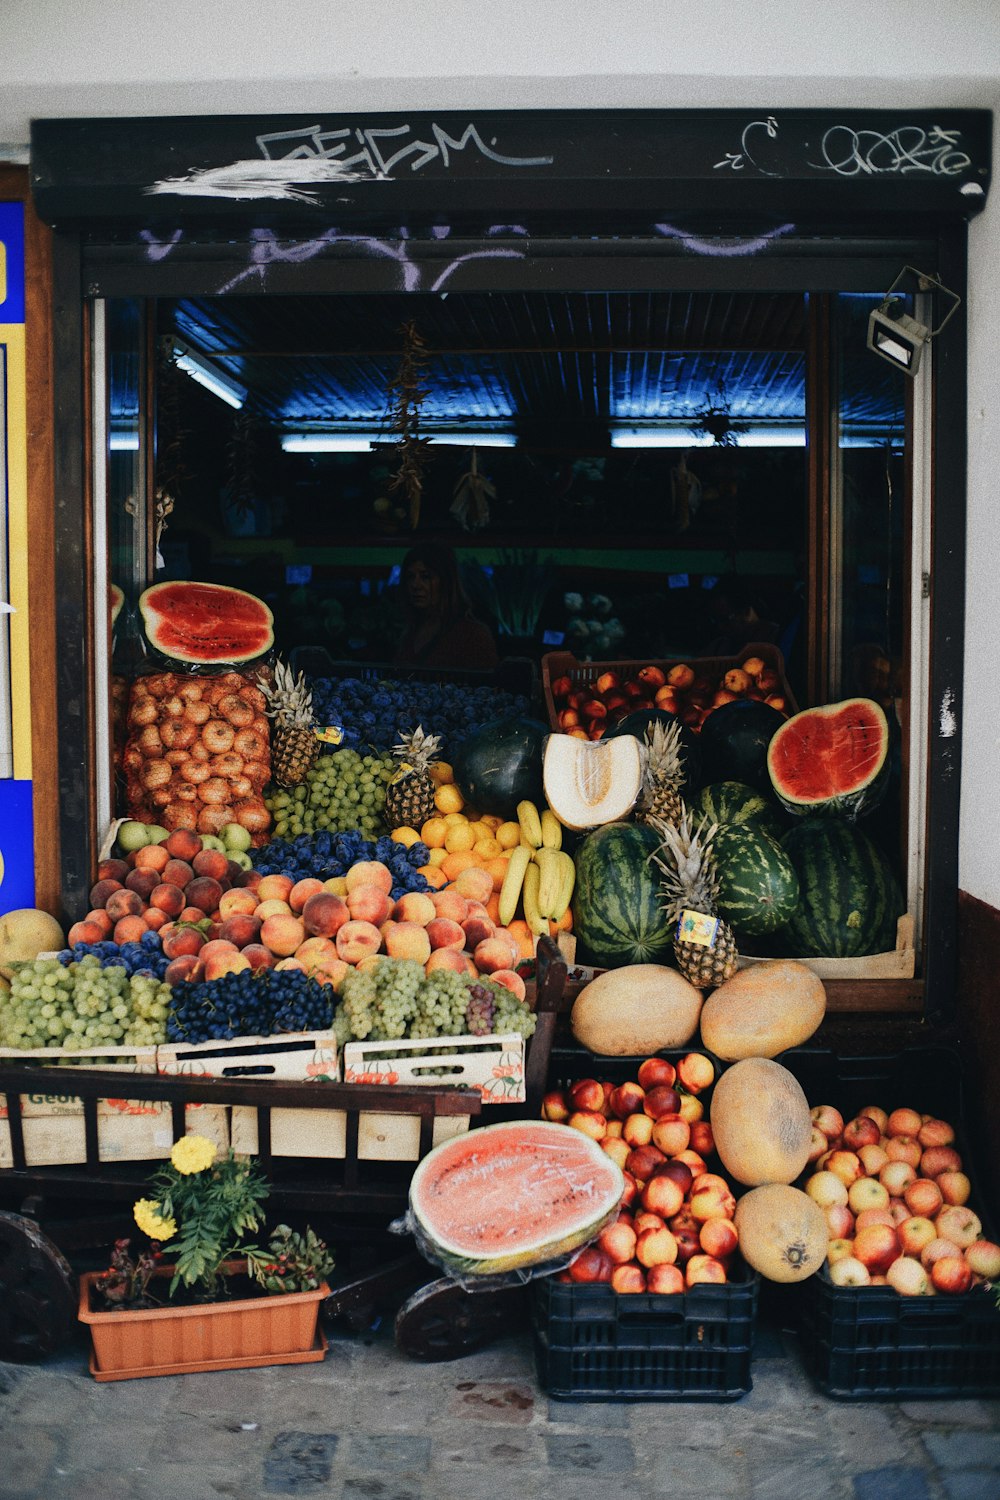 a fruit stand with a variety of fruits and vegetables